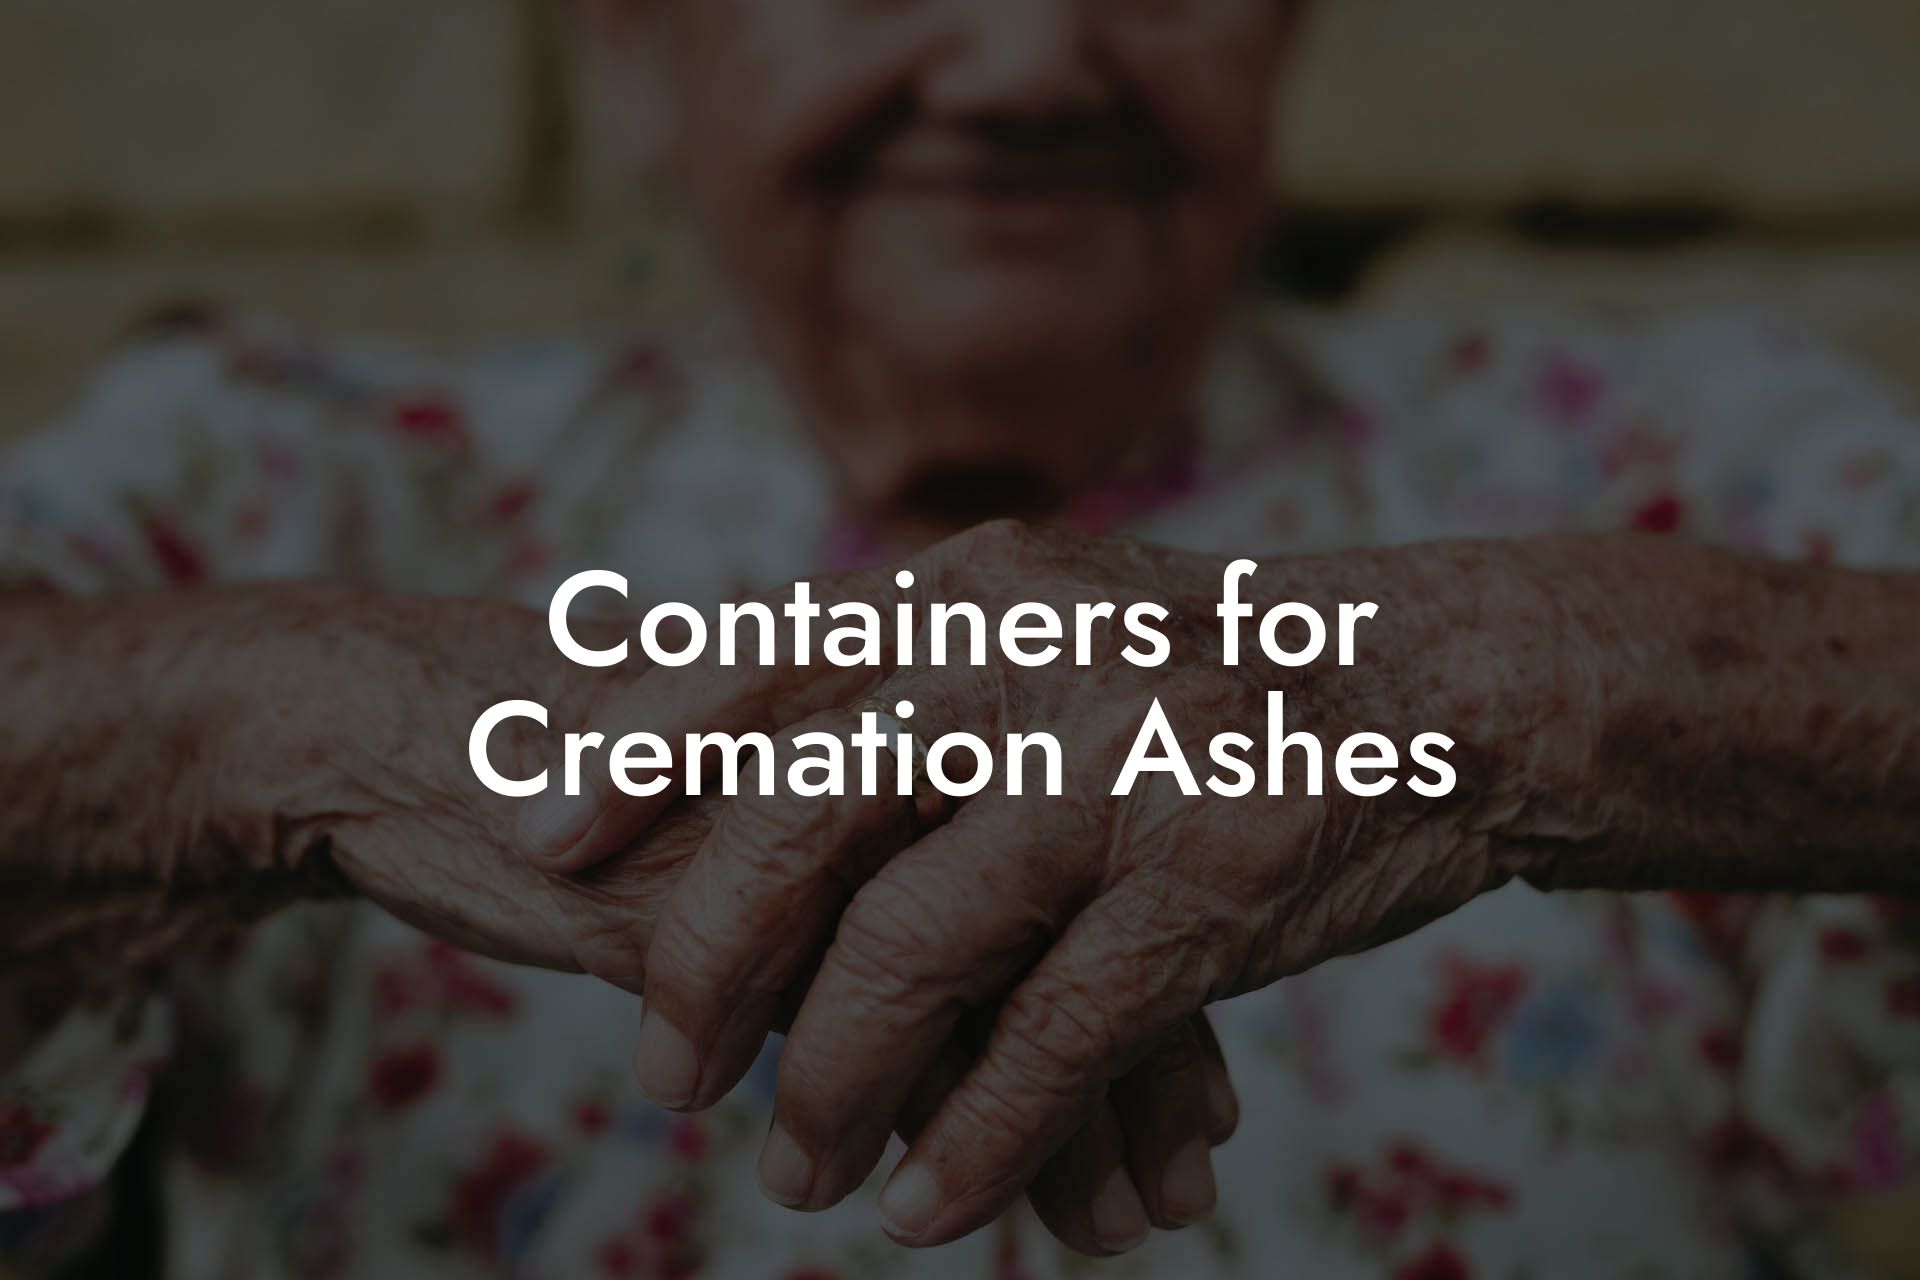 Containers for Cremation Ashes